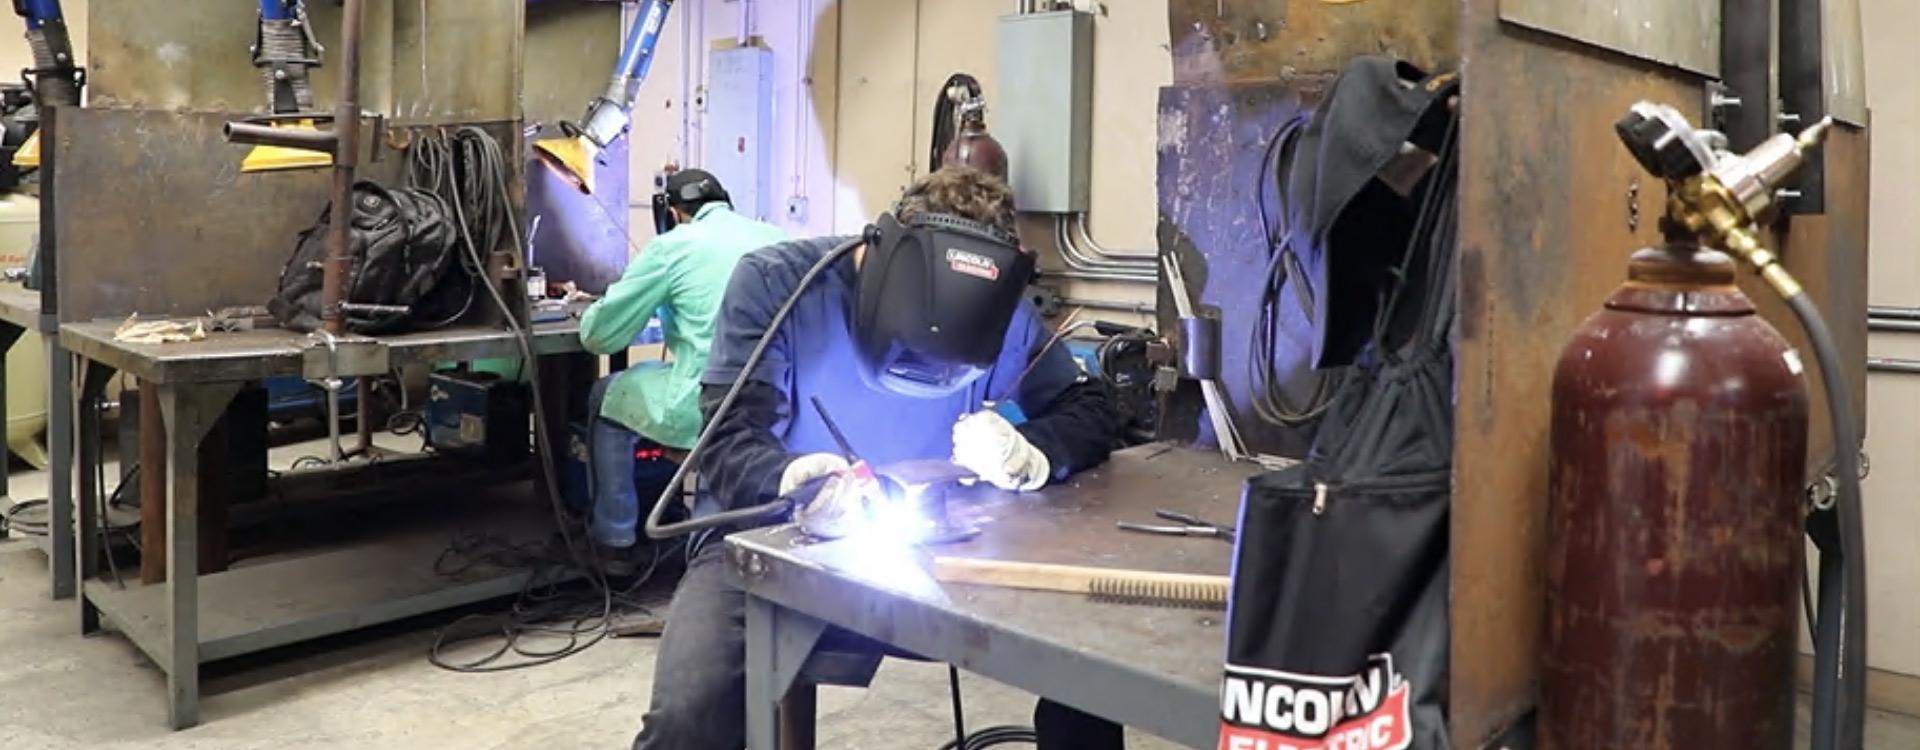 welding student wearing a mask and using a torch